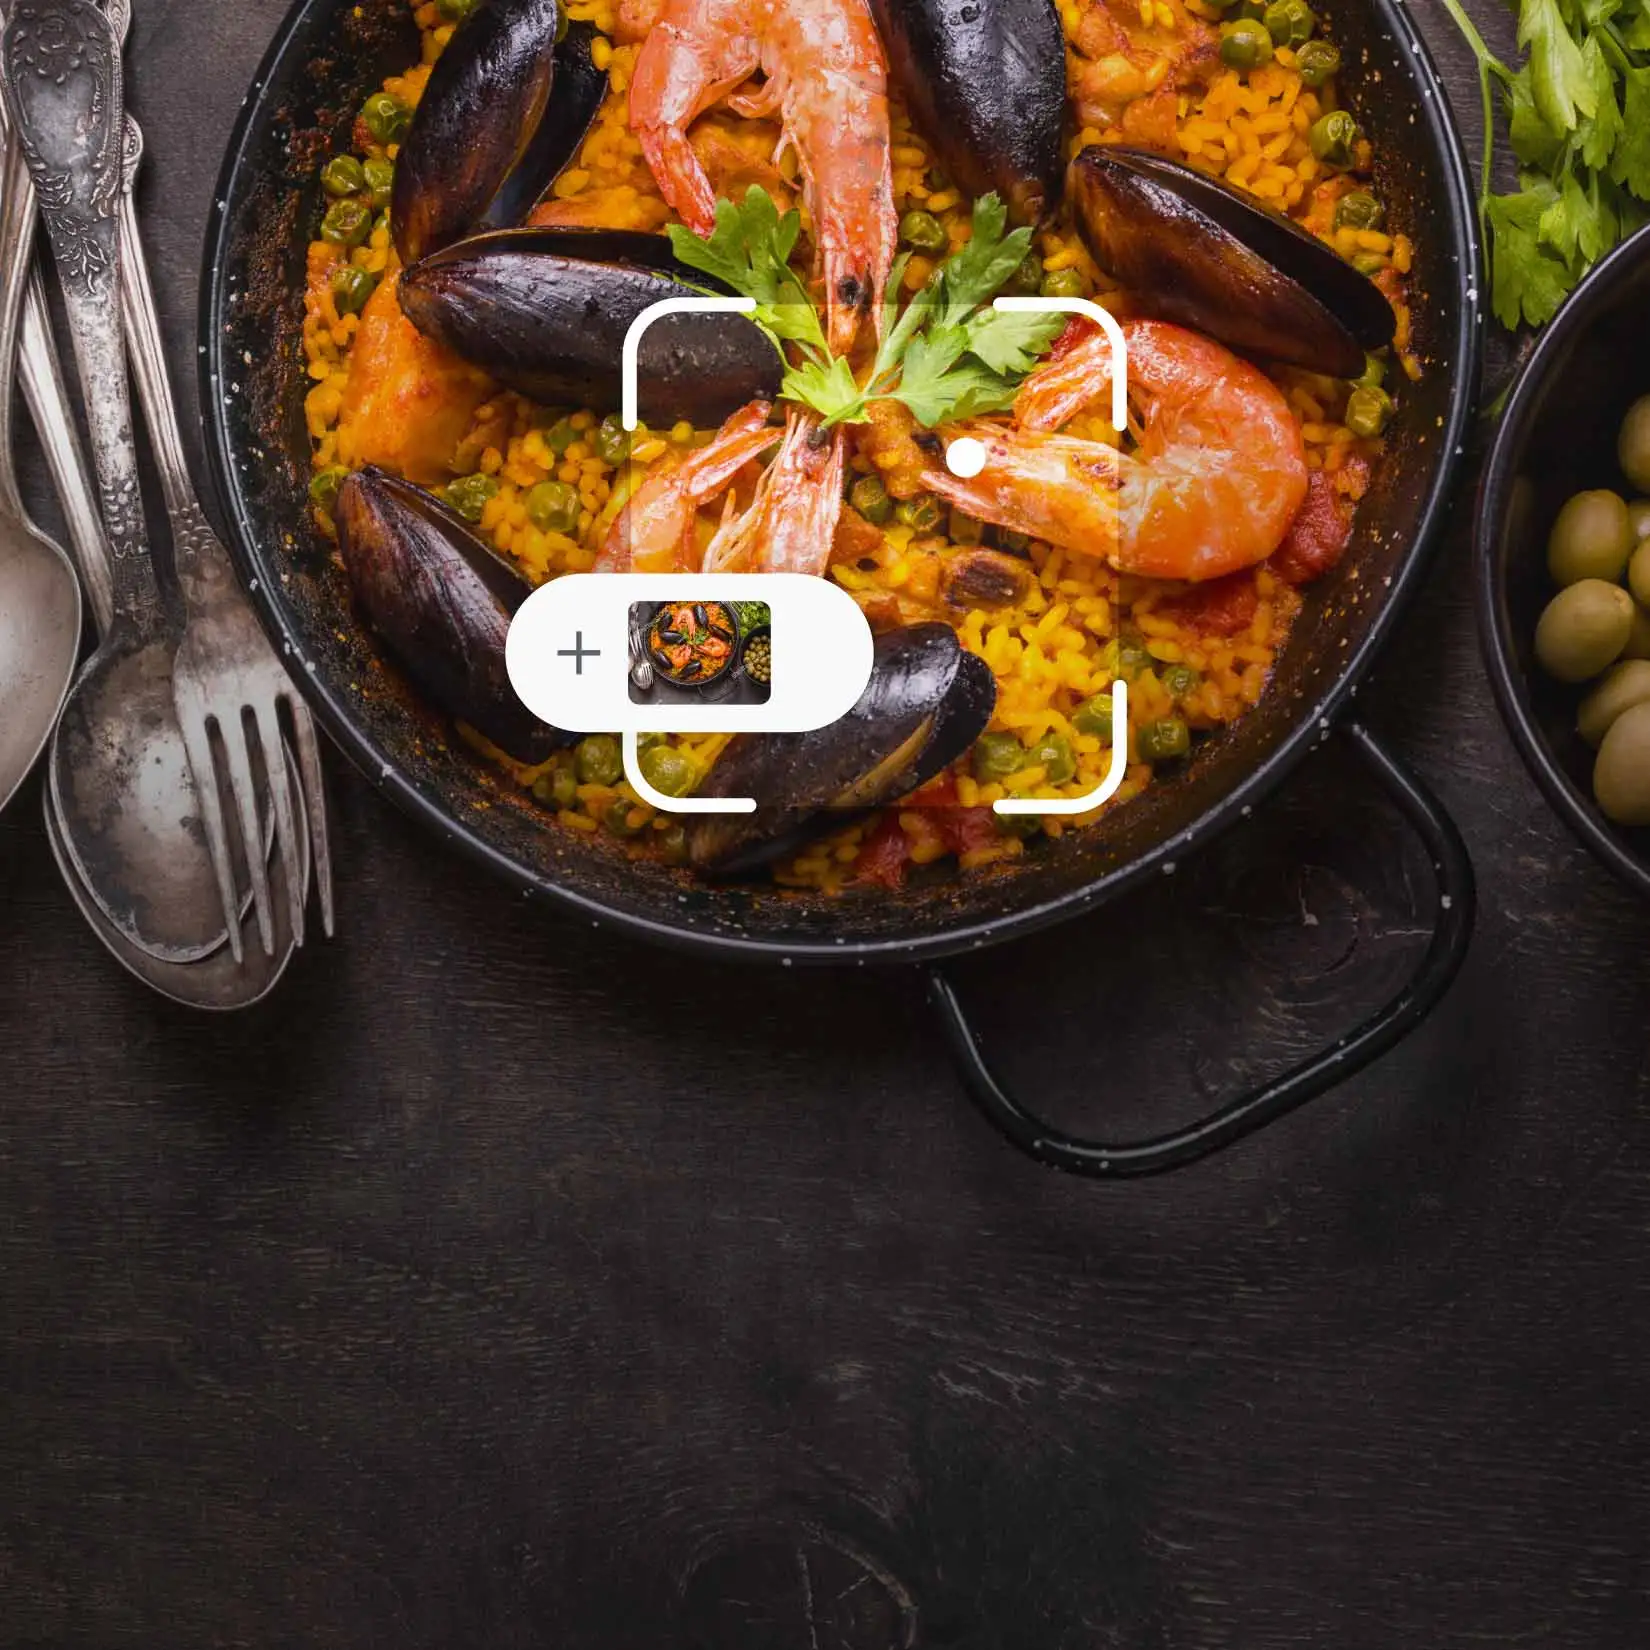 Image of paella with Google Lens framing around it